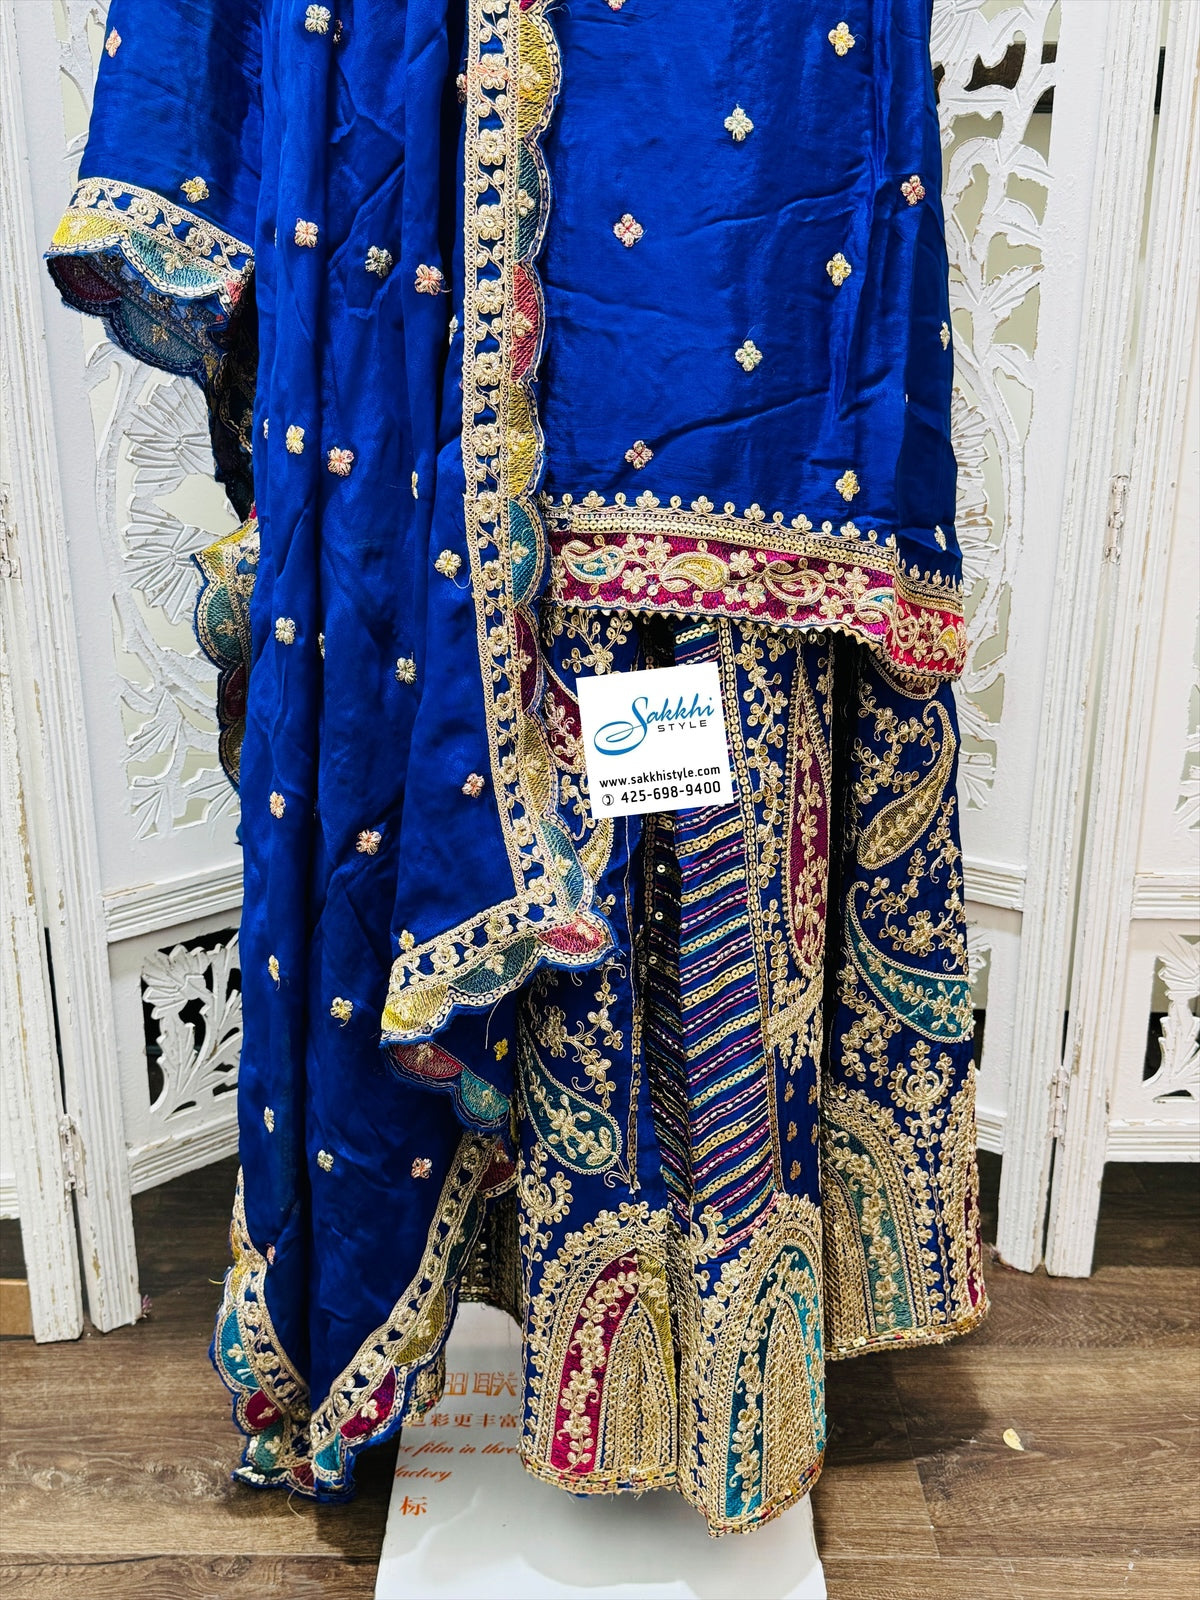 THREE PIECE PARTY WEAR SHARARA SUIT SET IN TWISTER BLUE HUE